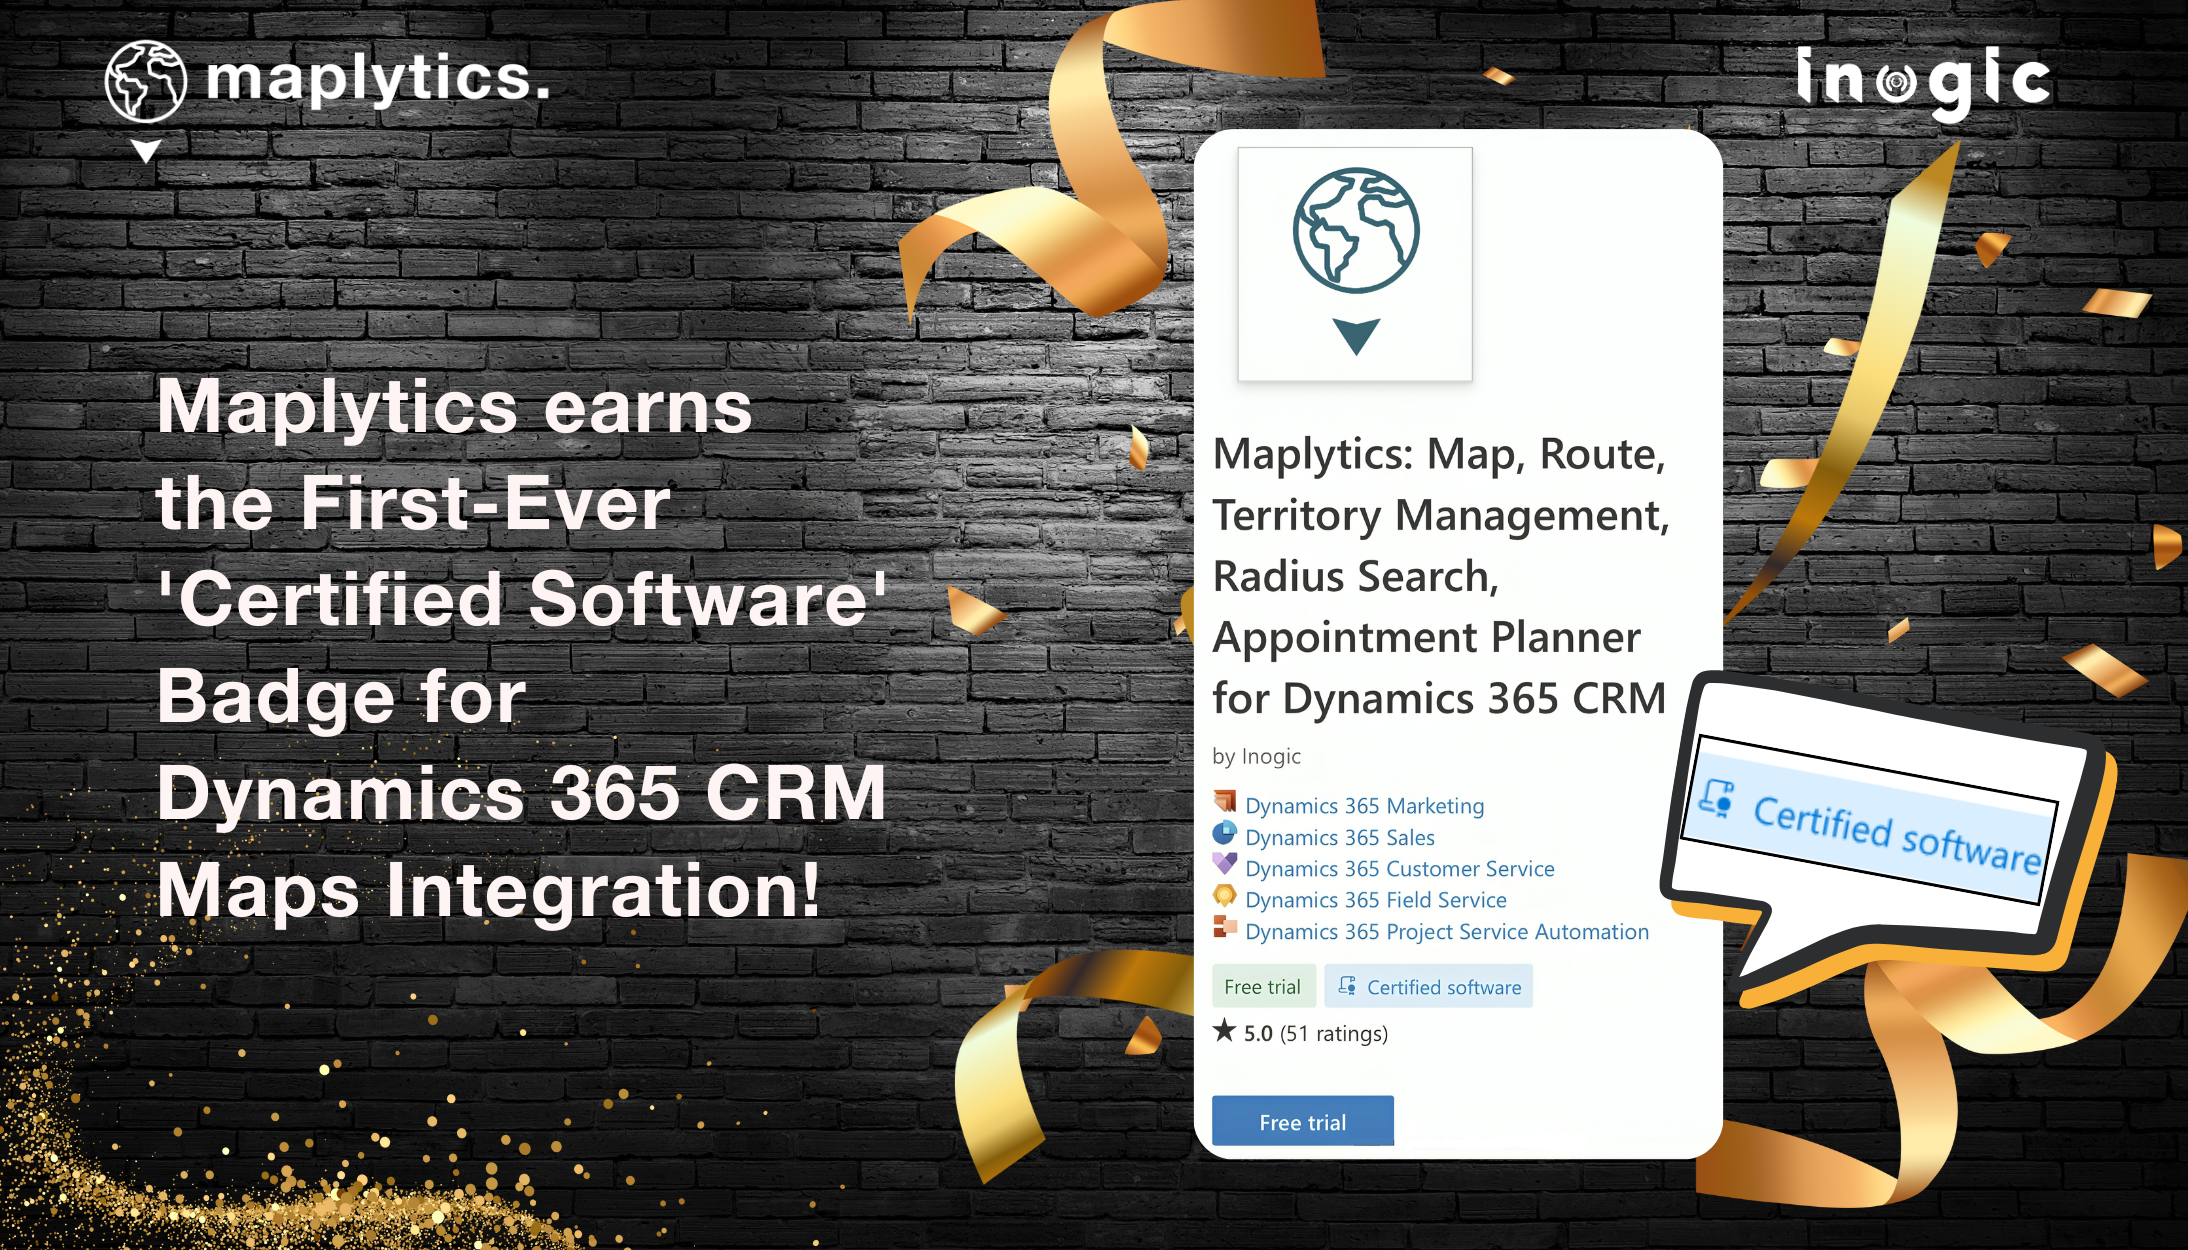 Maplytics Earns First Certified Software Badge for Dynamics 365 CRM | Inogic Blog